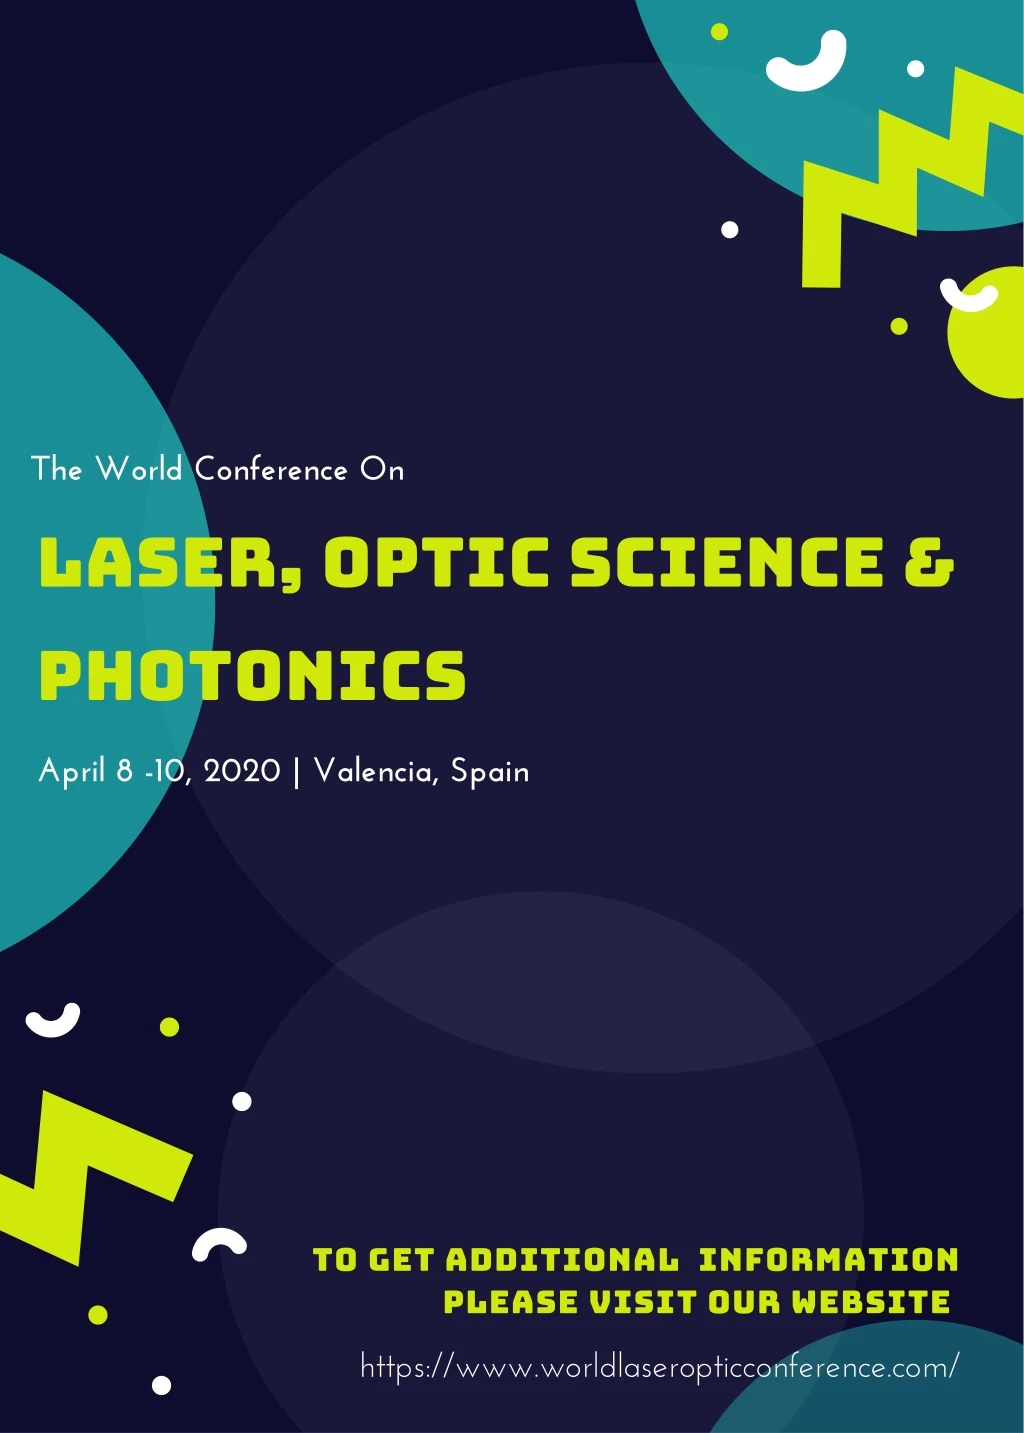 PPT The World Conference On Laser, Optic Science & Photonics (LSP